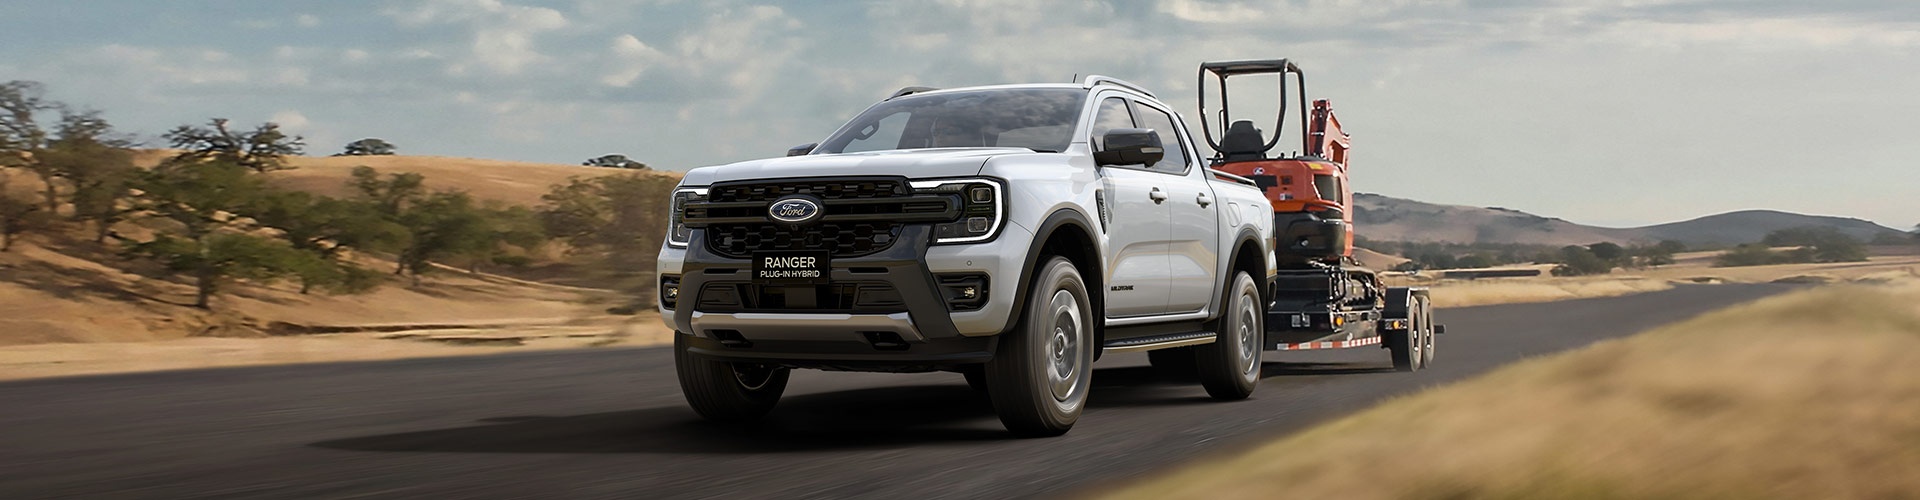 2025 Ford Ranger Plug-in Hybrid towing